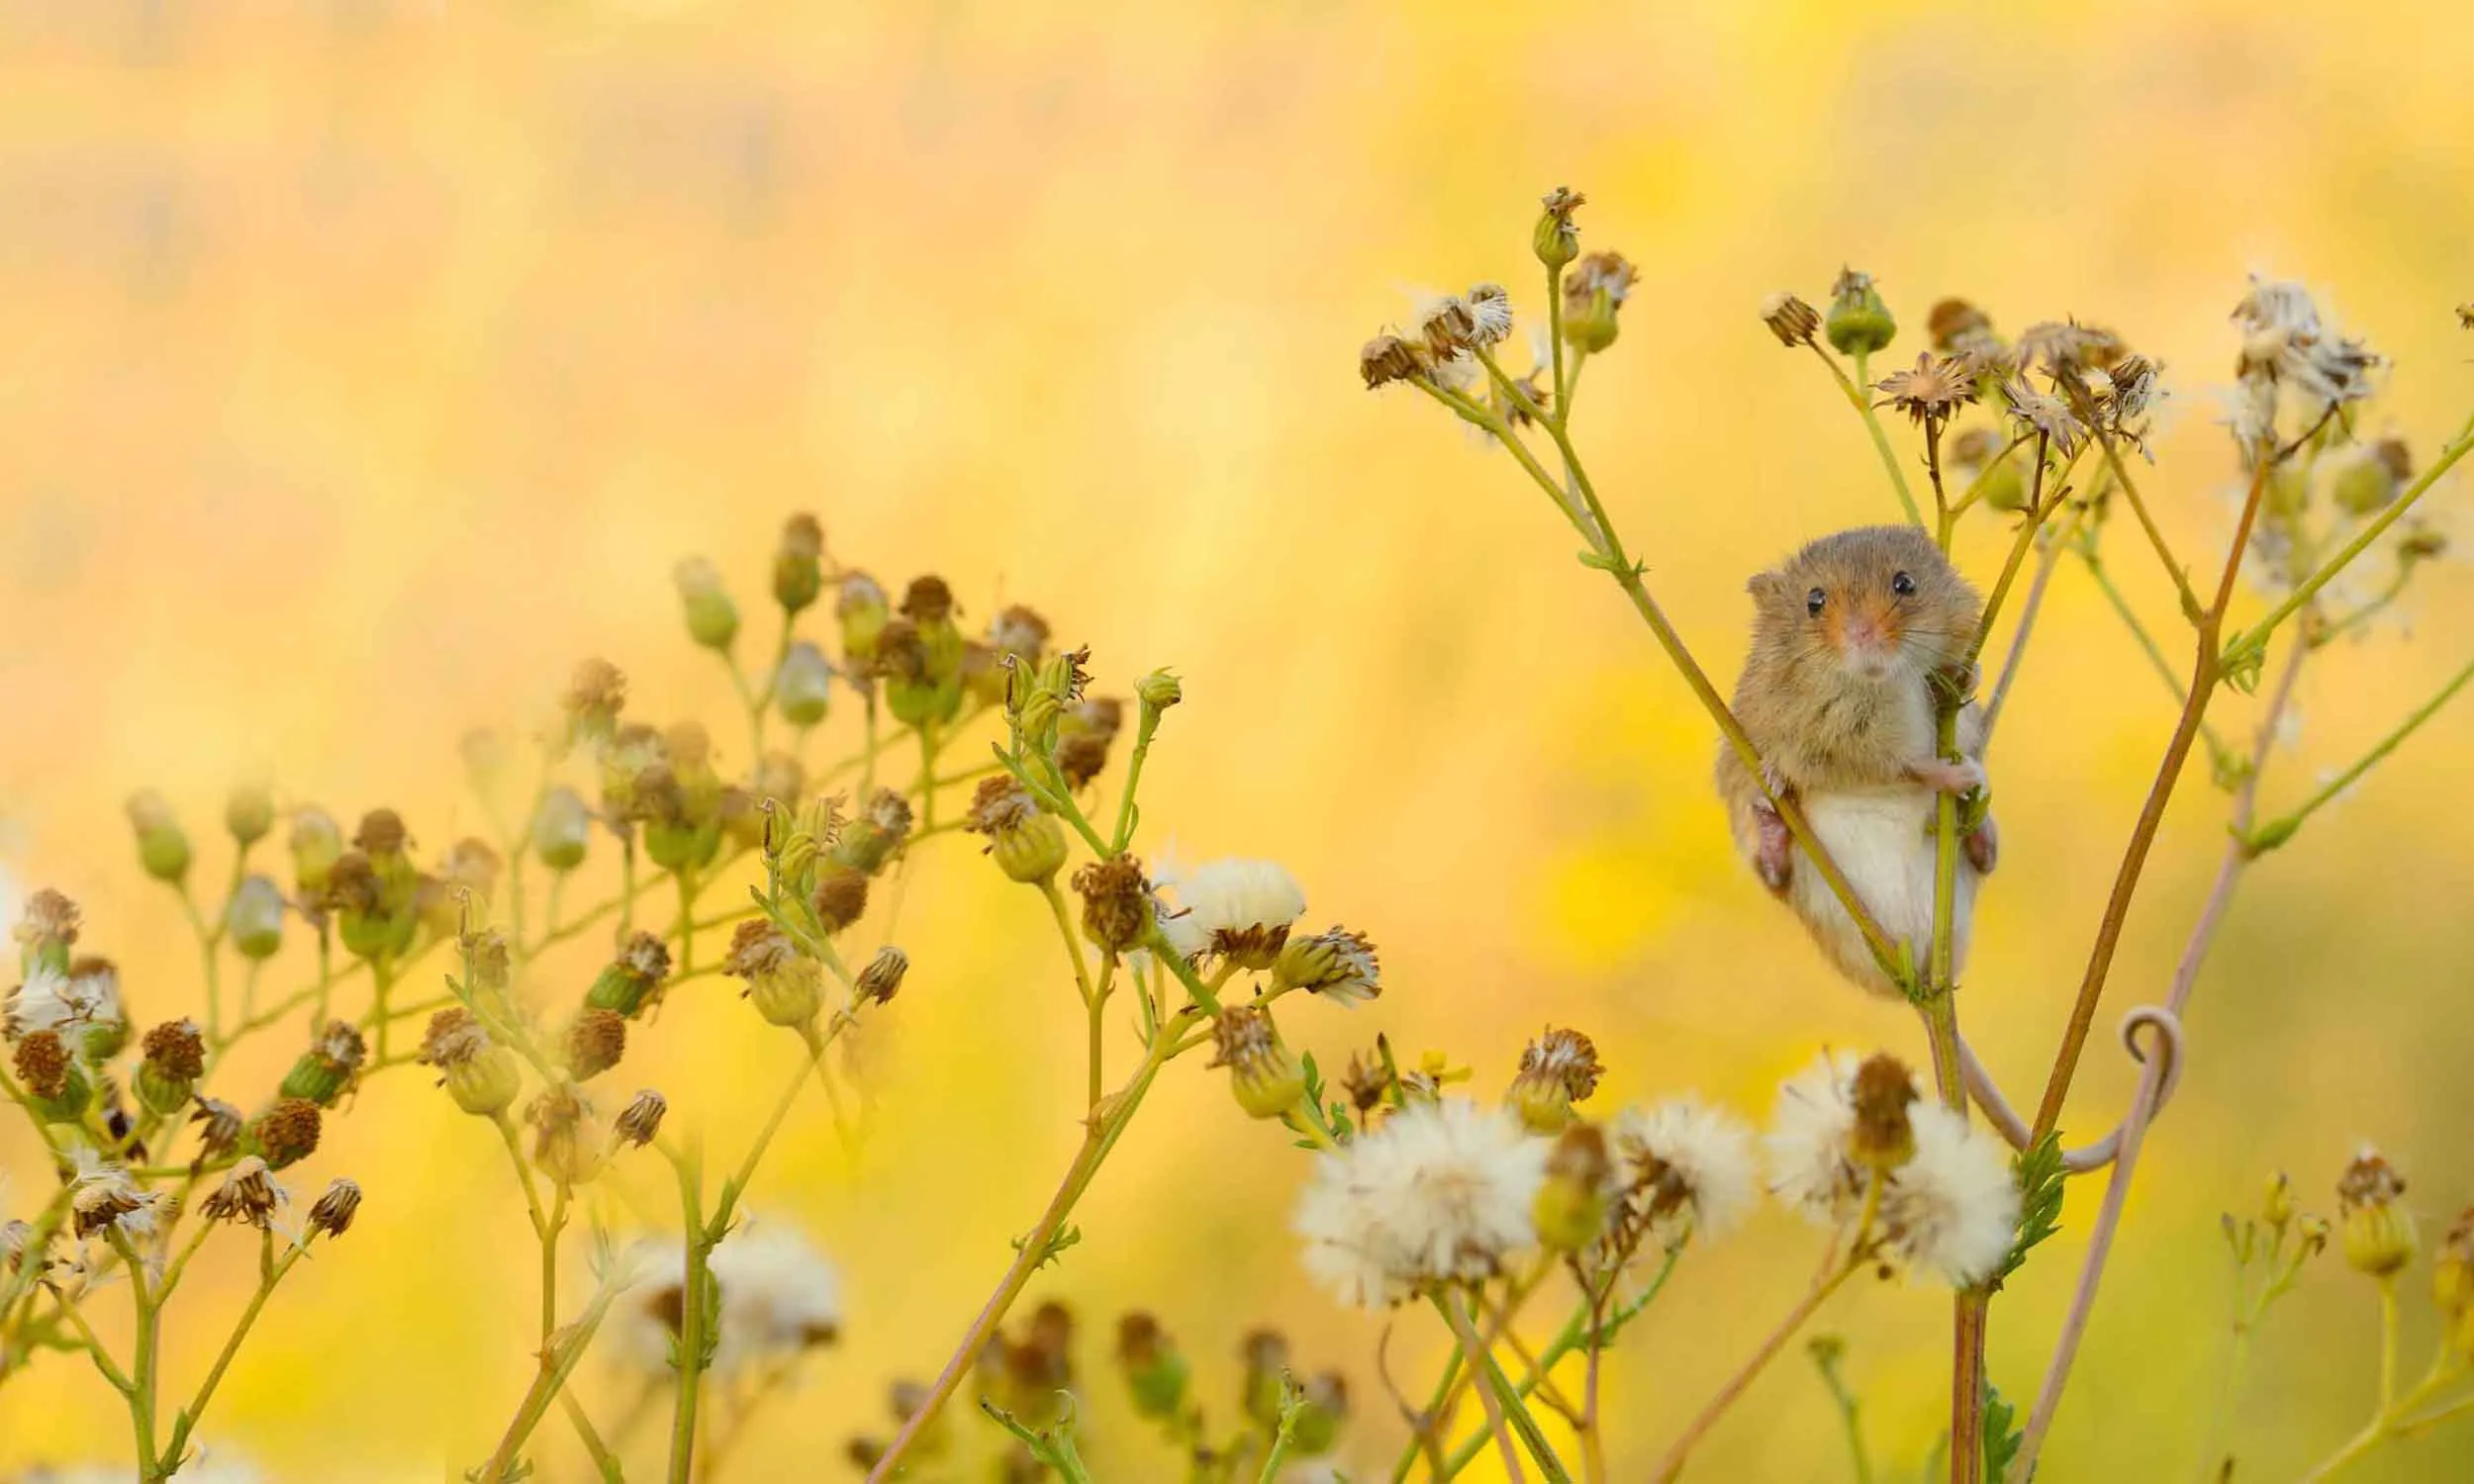 A lone mouse clinging to flowers in a yellow coloured meadow.